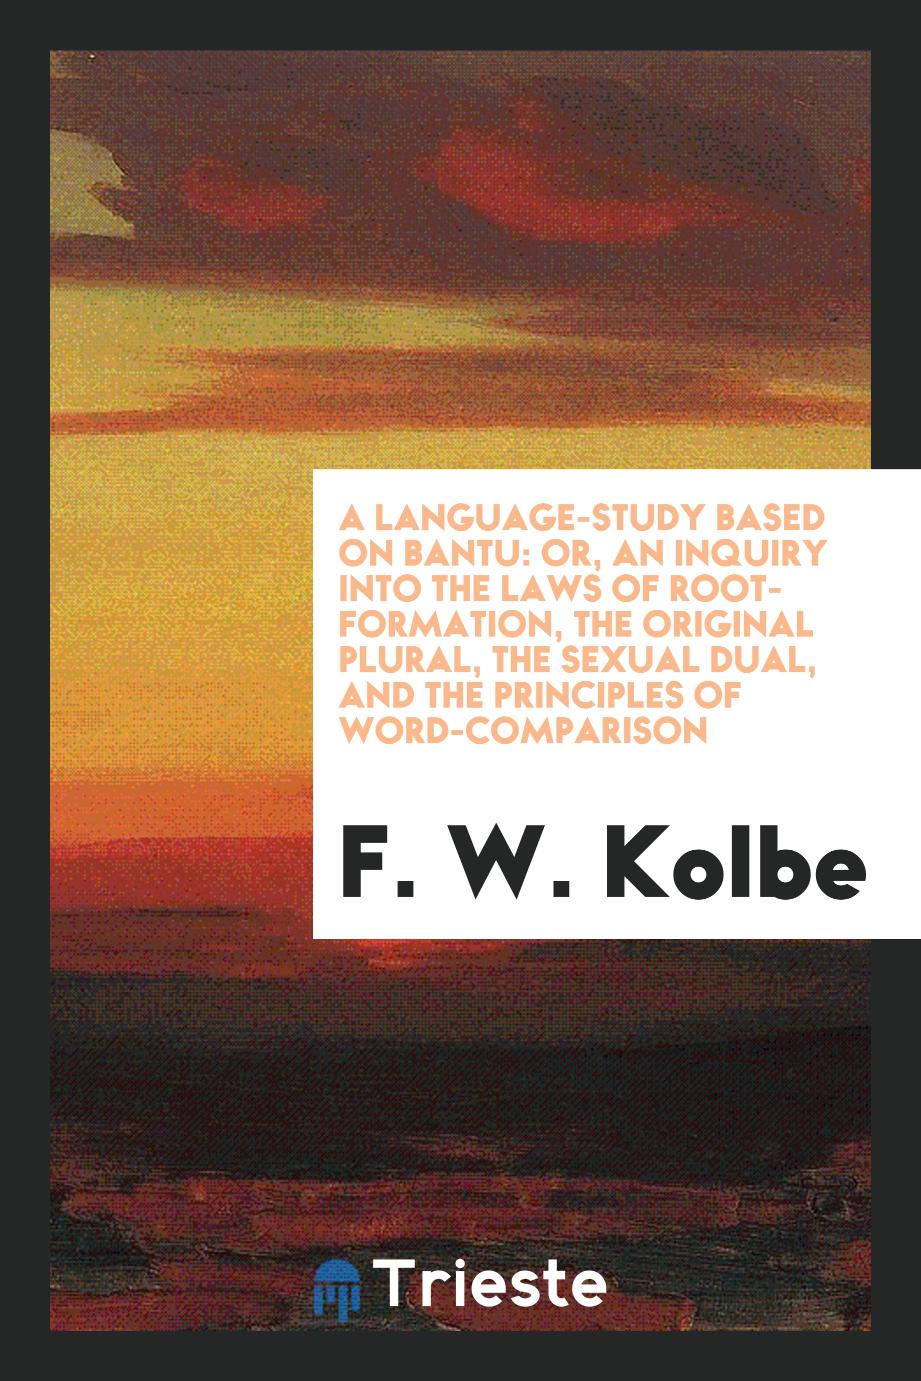 A Language-Study Based on Bantu: Or, an Inquiry into the Laws of Root-Formation, the Original Plural, the Sexual Dual, and the Principles of Word-Comparison